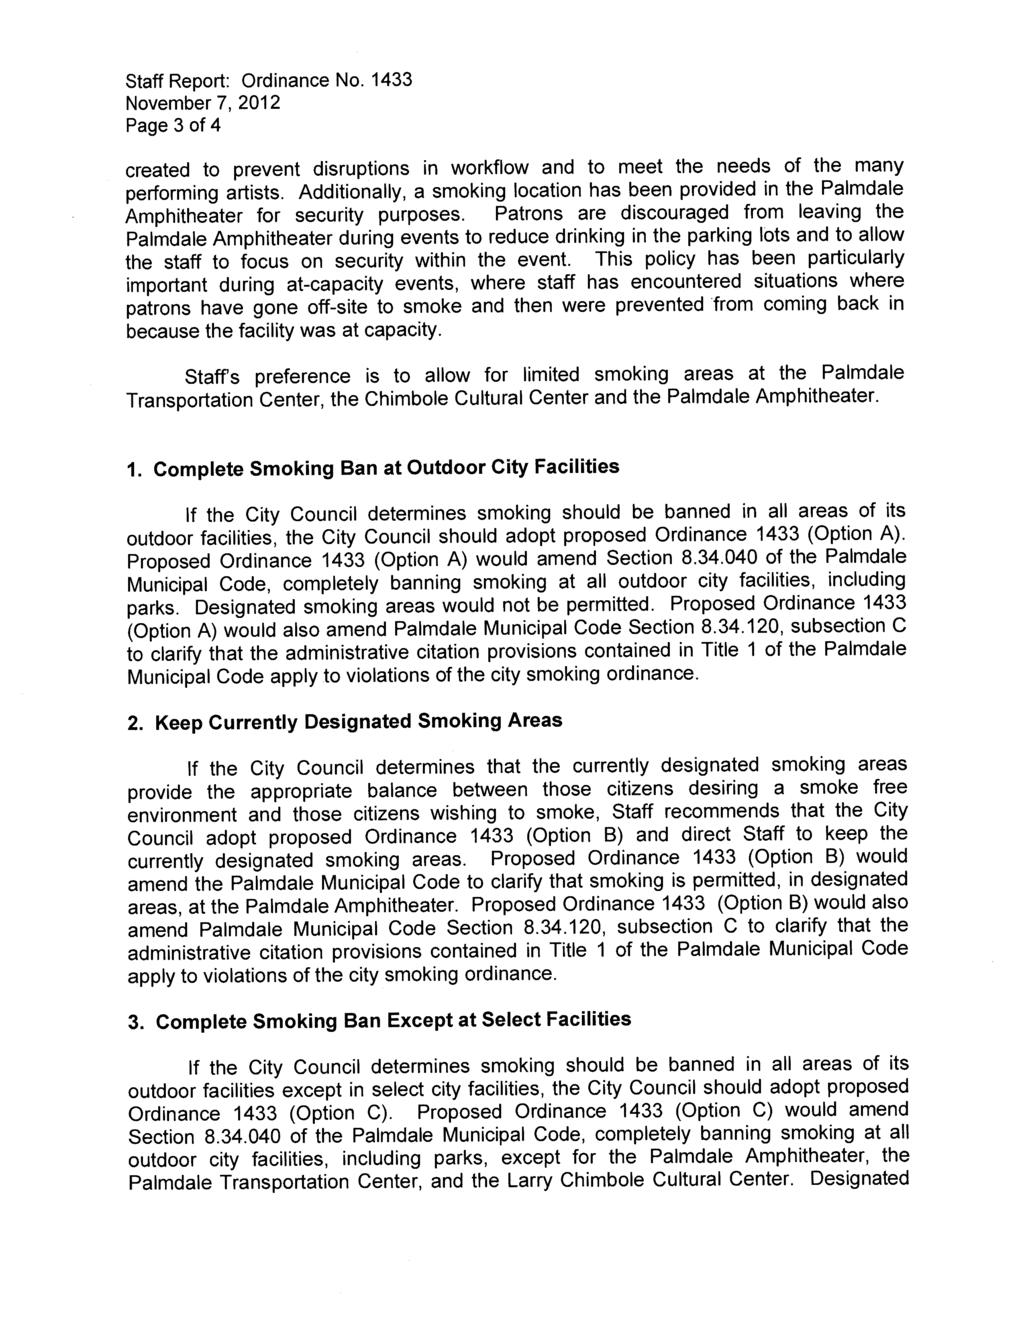 Staff Report: Ordinance No. 1433 November 7, 2012 Page 3 of 4 created to prevent disruptions in workflow and to meet the needs of the many performing artists.